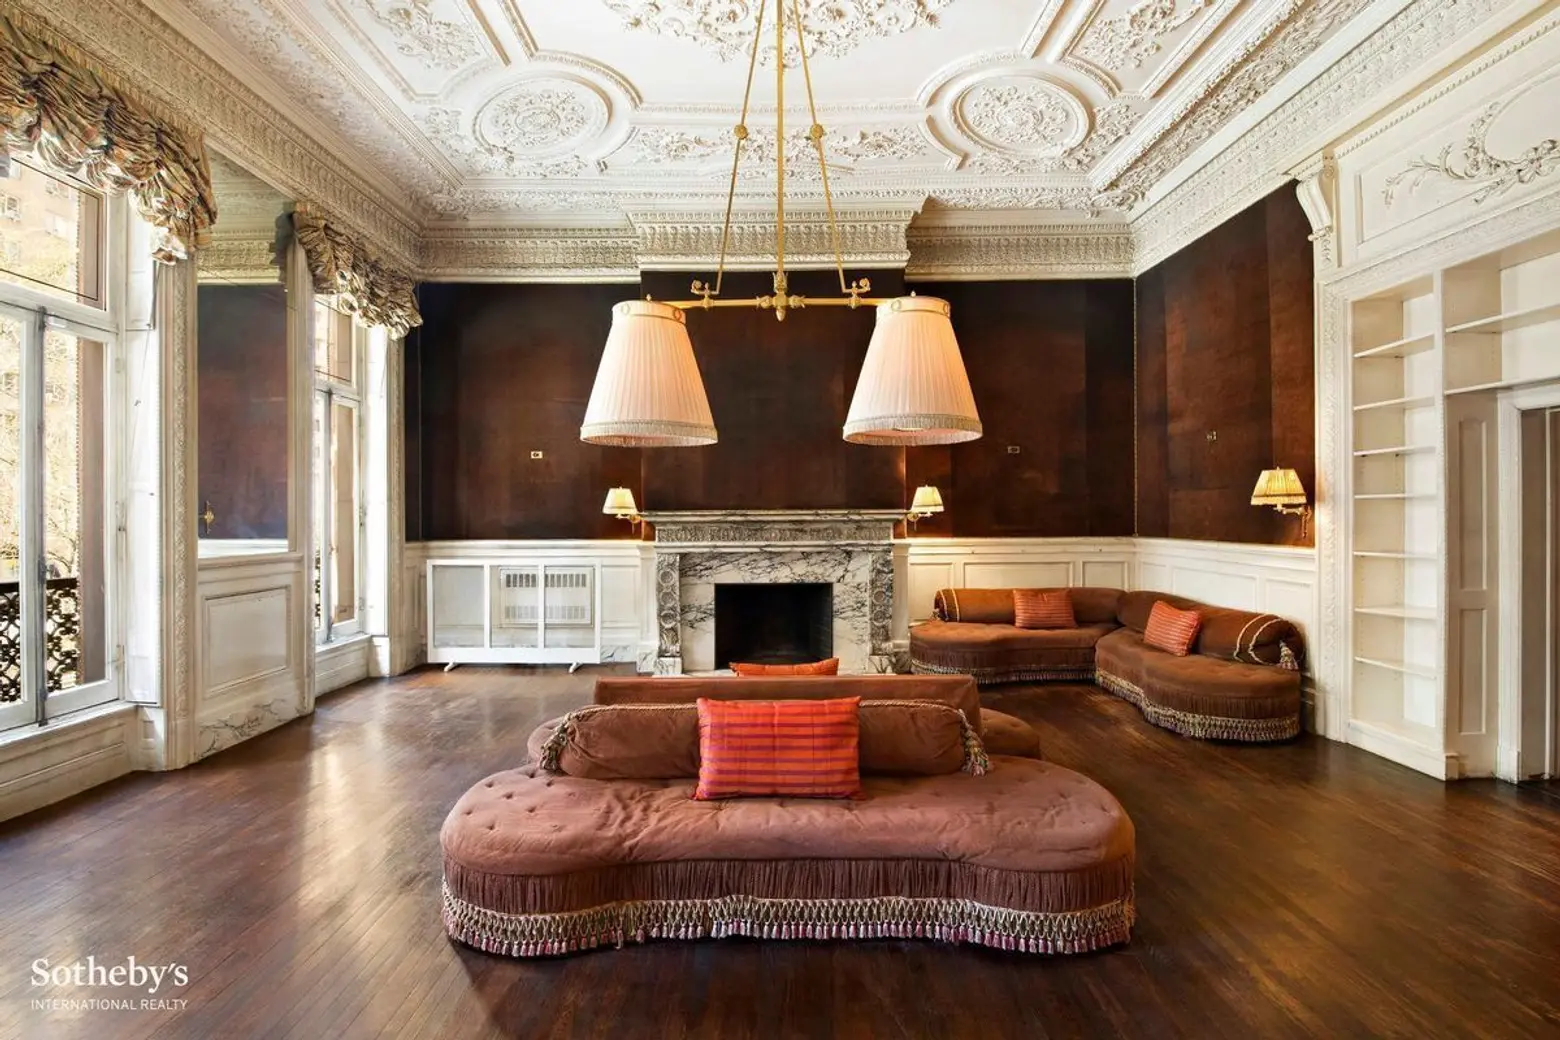 For $3.2M, costume jewelry connoisseur Kenneth Jay Lane’s former Stanford White-designed duplex